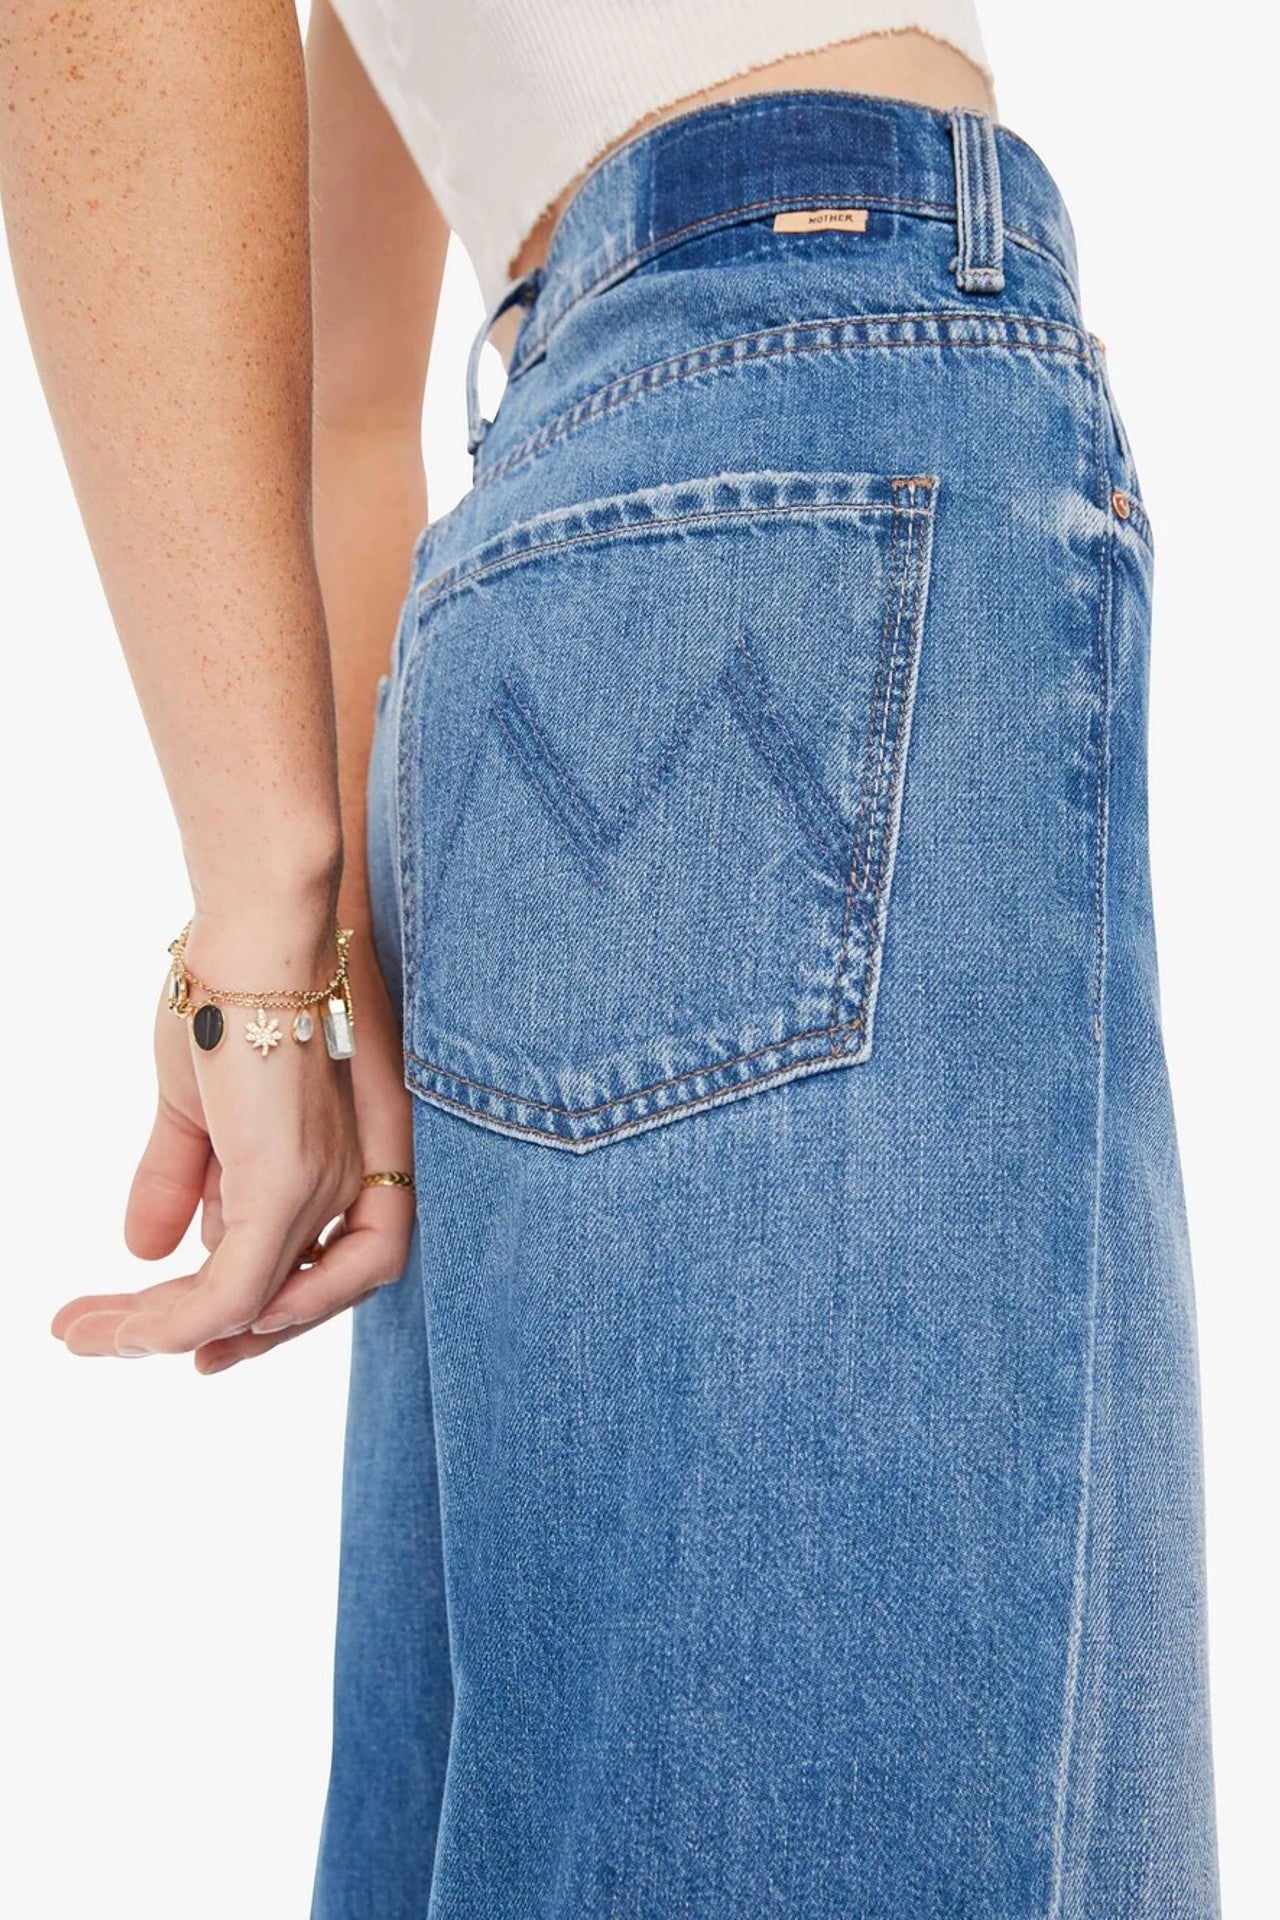 The Ditcher Roller Sneak Jeans